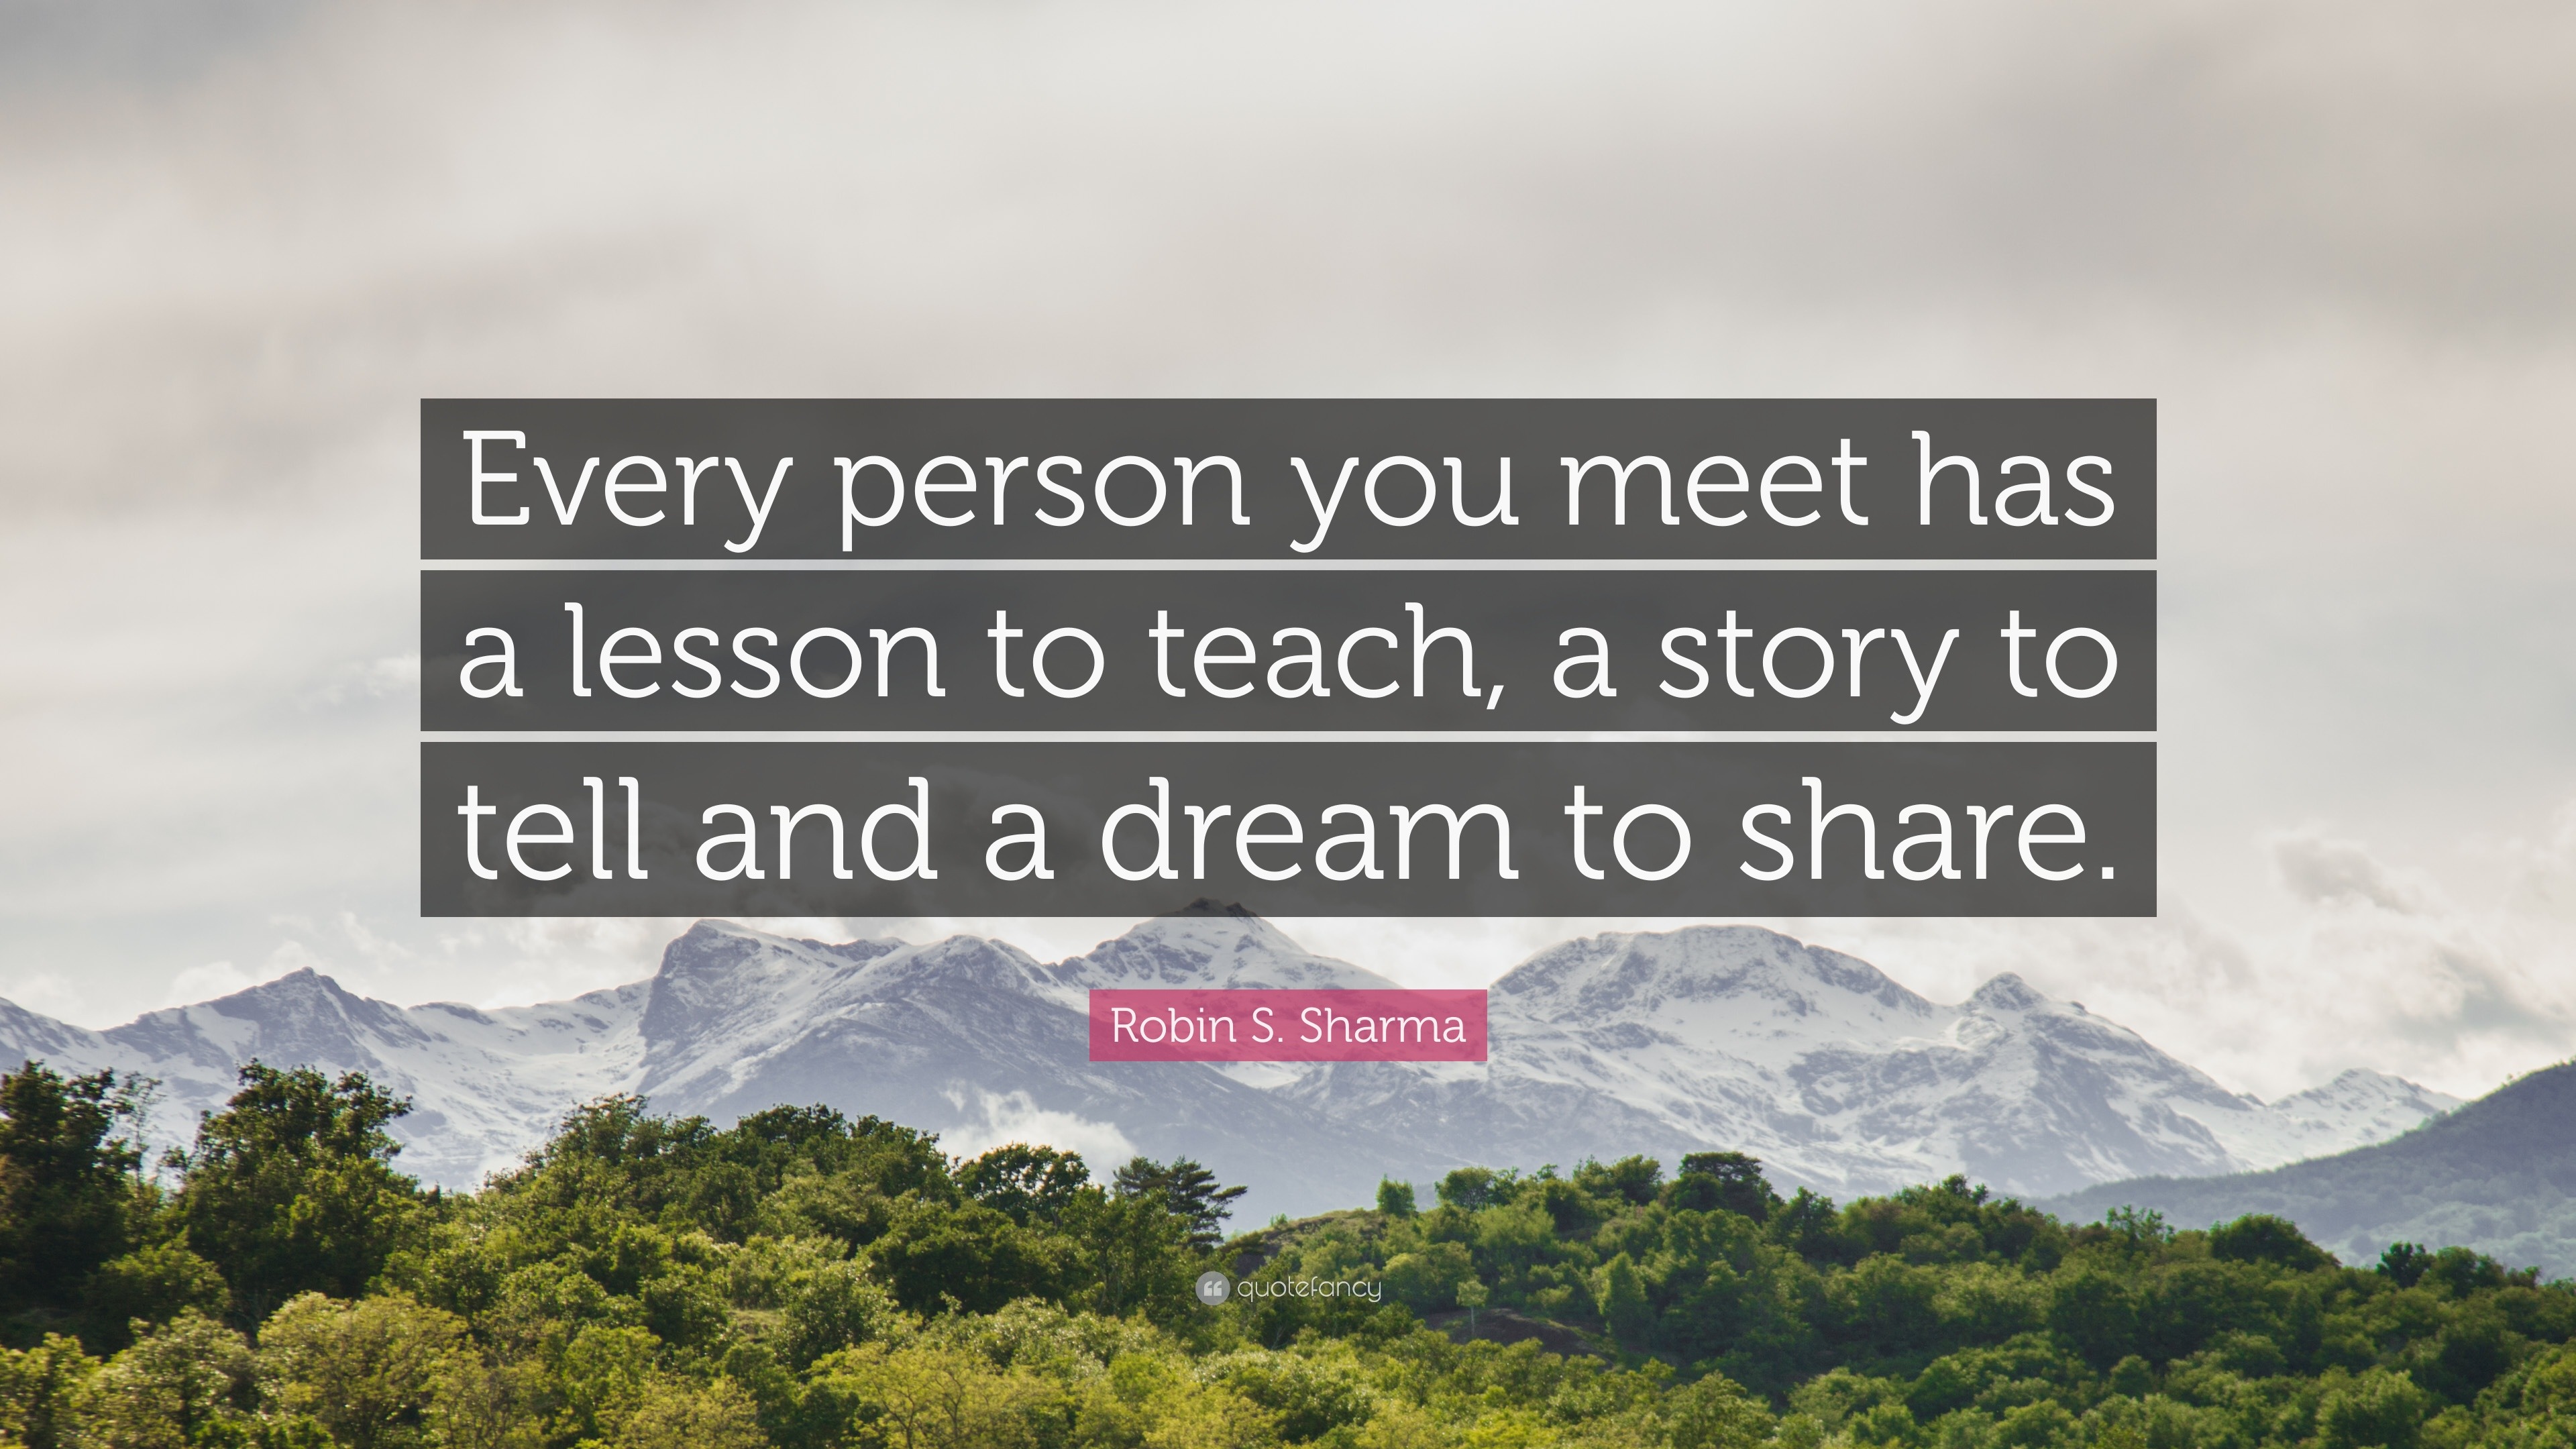 Robin S Sharma Quote Every Person You Meet Has A Lesson To Teach A Story To